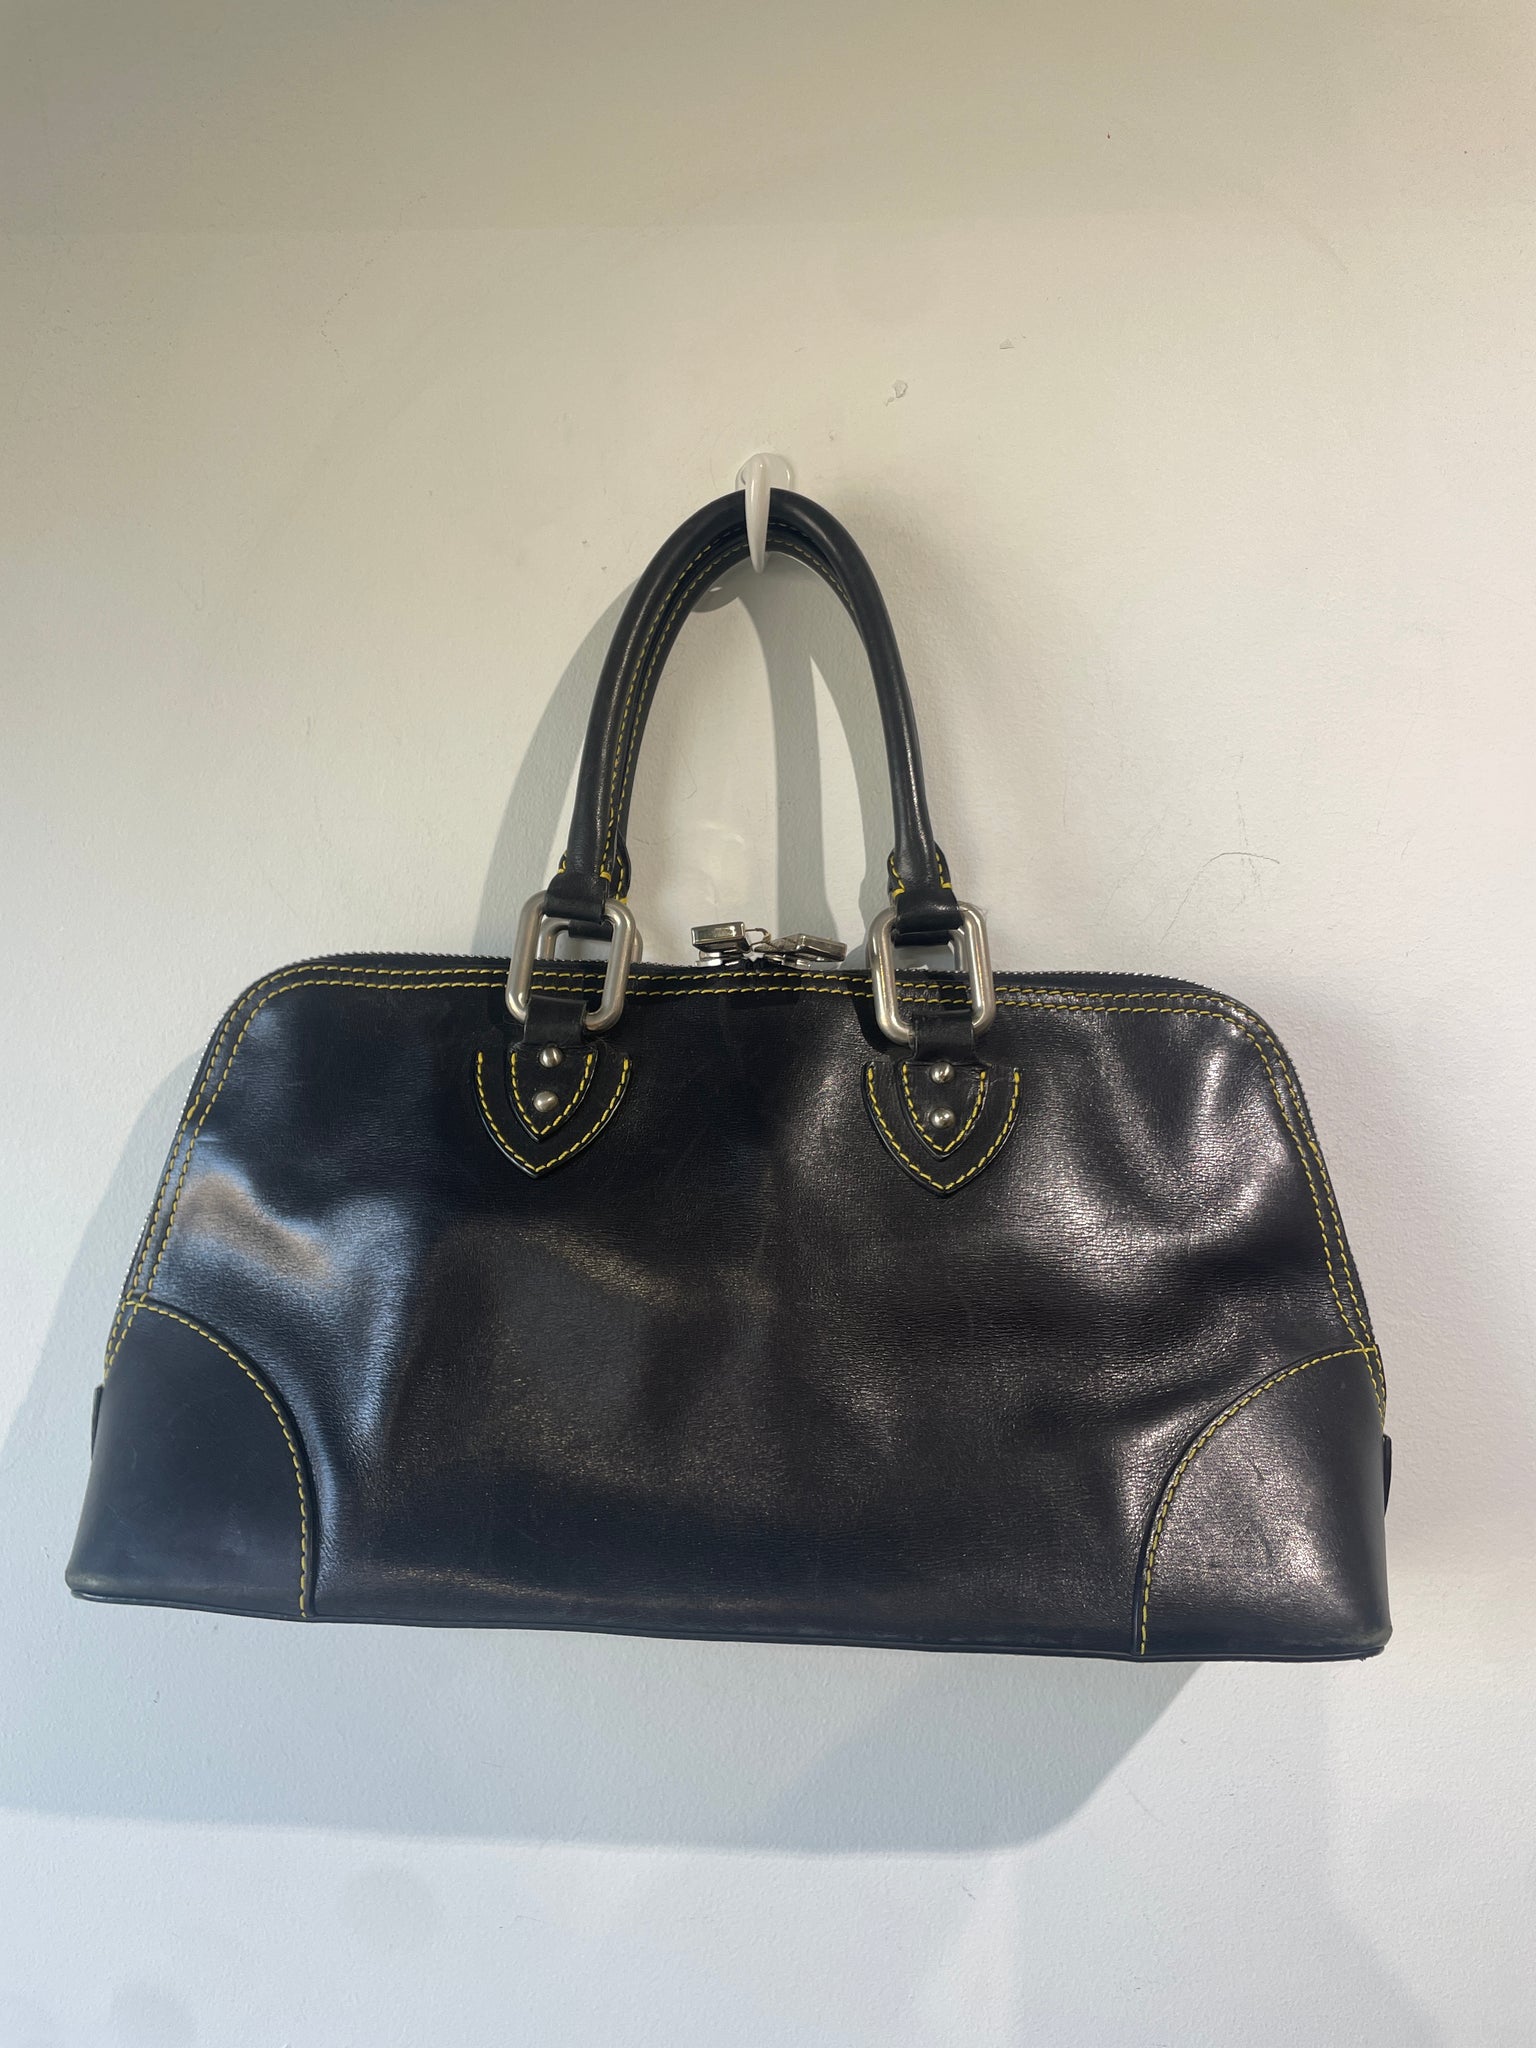 Marc Jacobs vintage Petal to the Metal bag €20 : r/ThriftStoreHauls